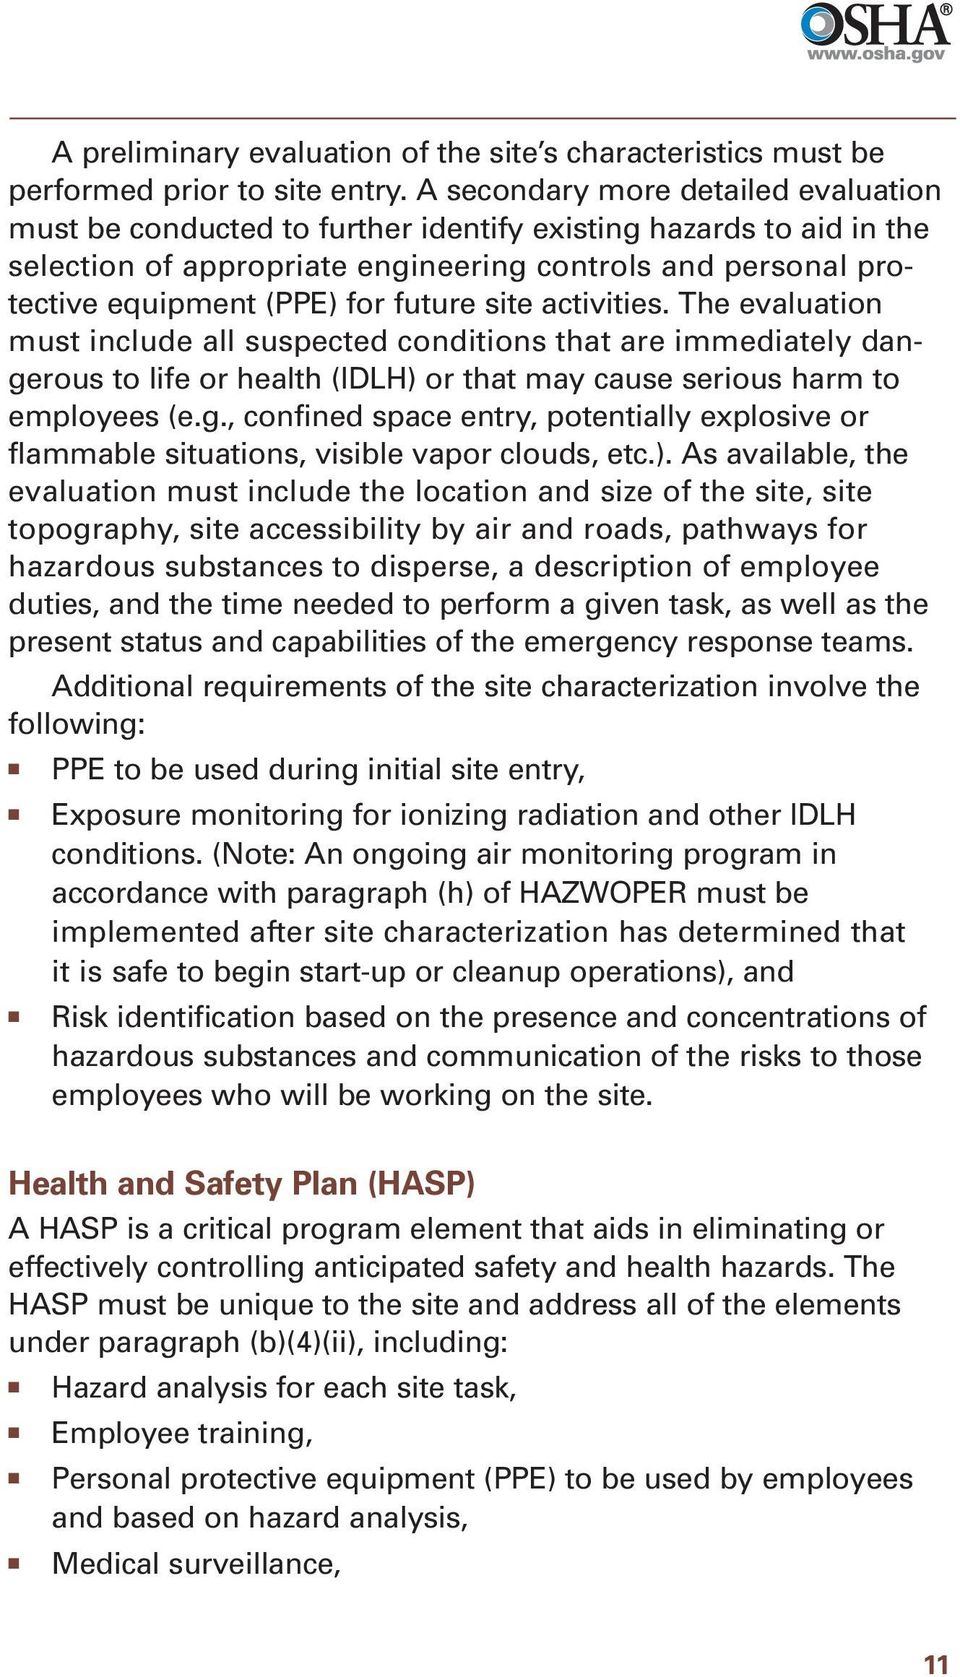 future site activities. The evaluation must include all suspected conditions that are immediately dangerous to life or health (IDLH) or that may cause serious harm to employees (e.g., confined space entry, potentially explosive or flammable situations, visible vapor clouds, etc.